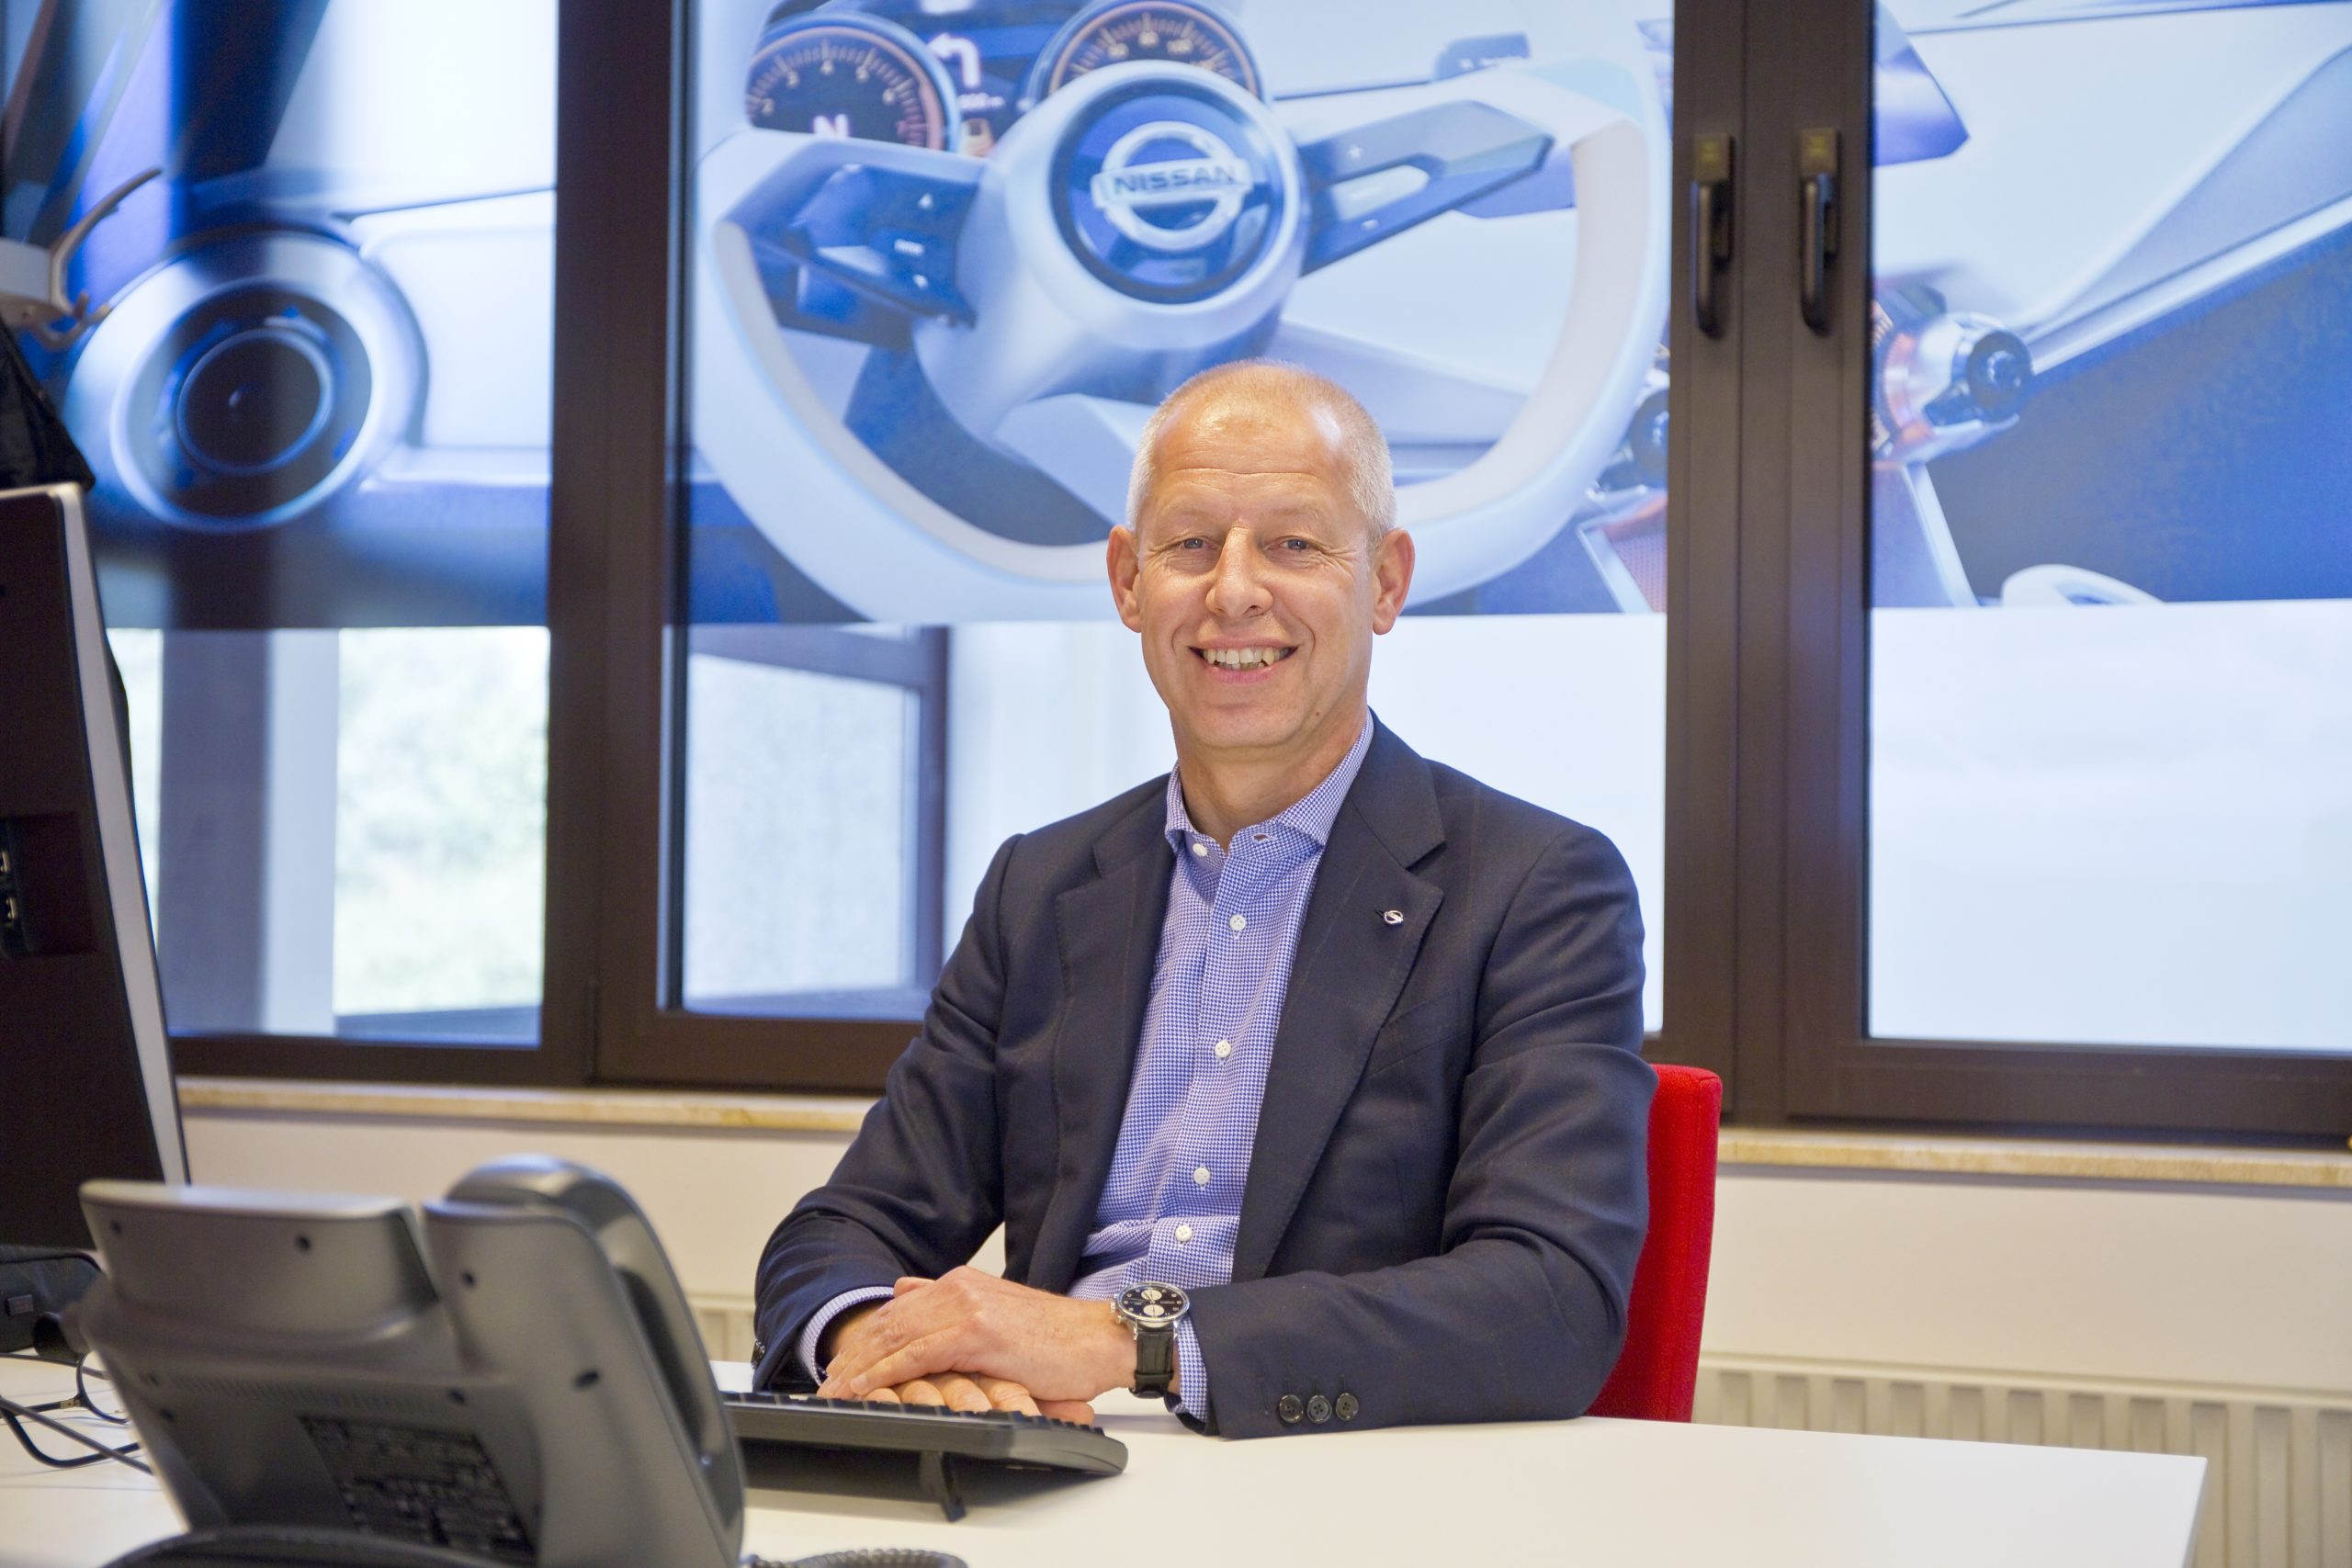 Nissan MD West Europe: ‘We will be the smart follower’